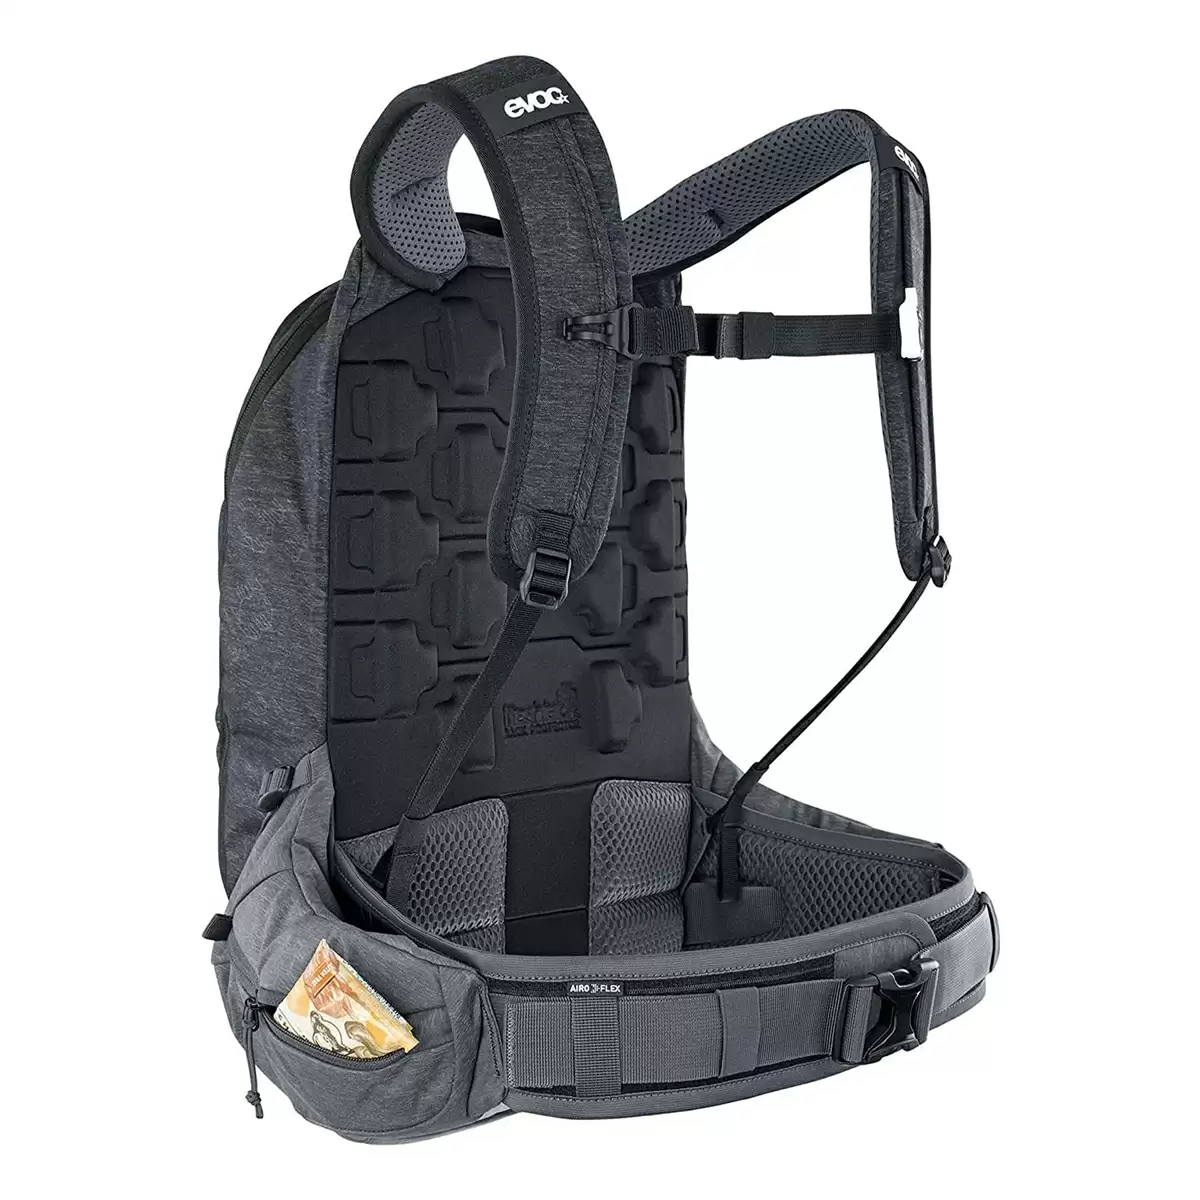 Trail Pro backpack 16 liters black - carbon gray with back protector size S/M #2